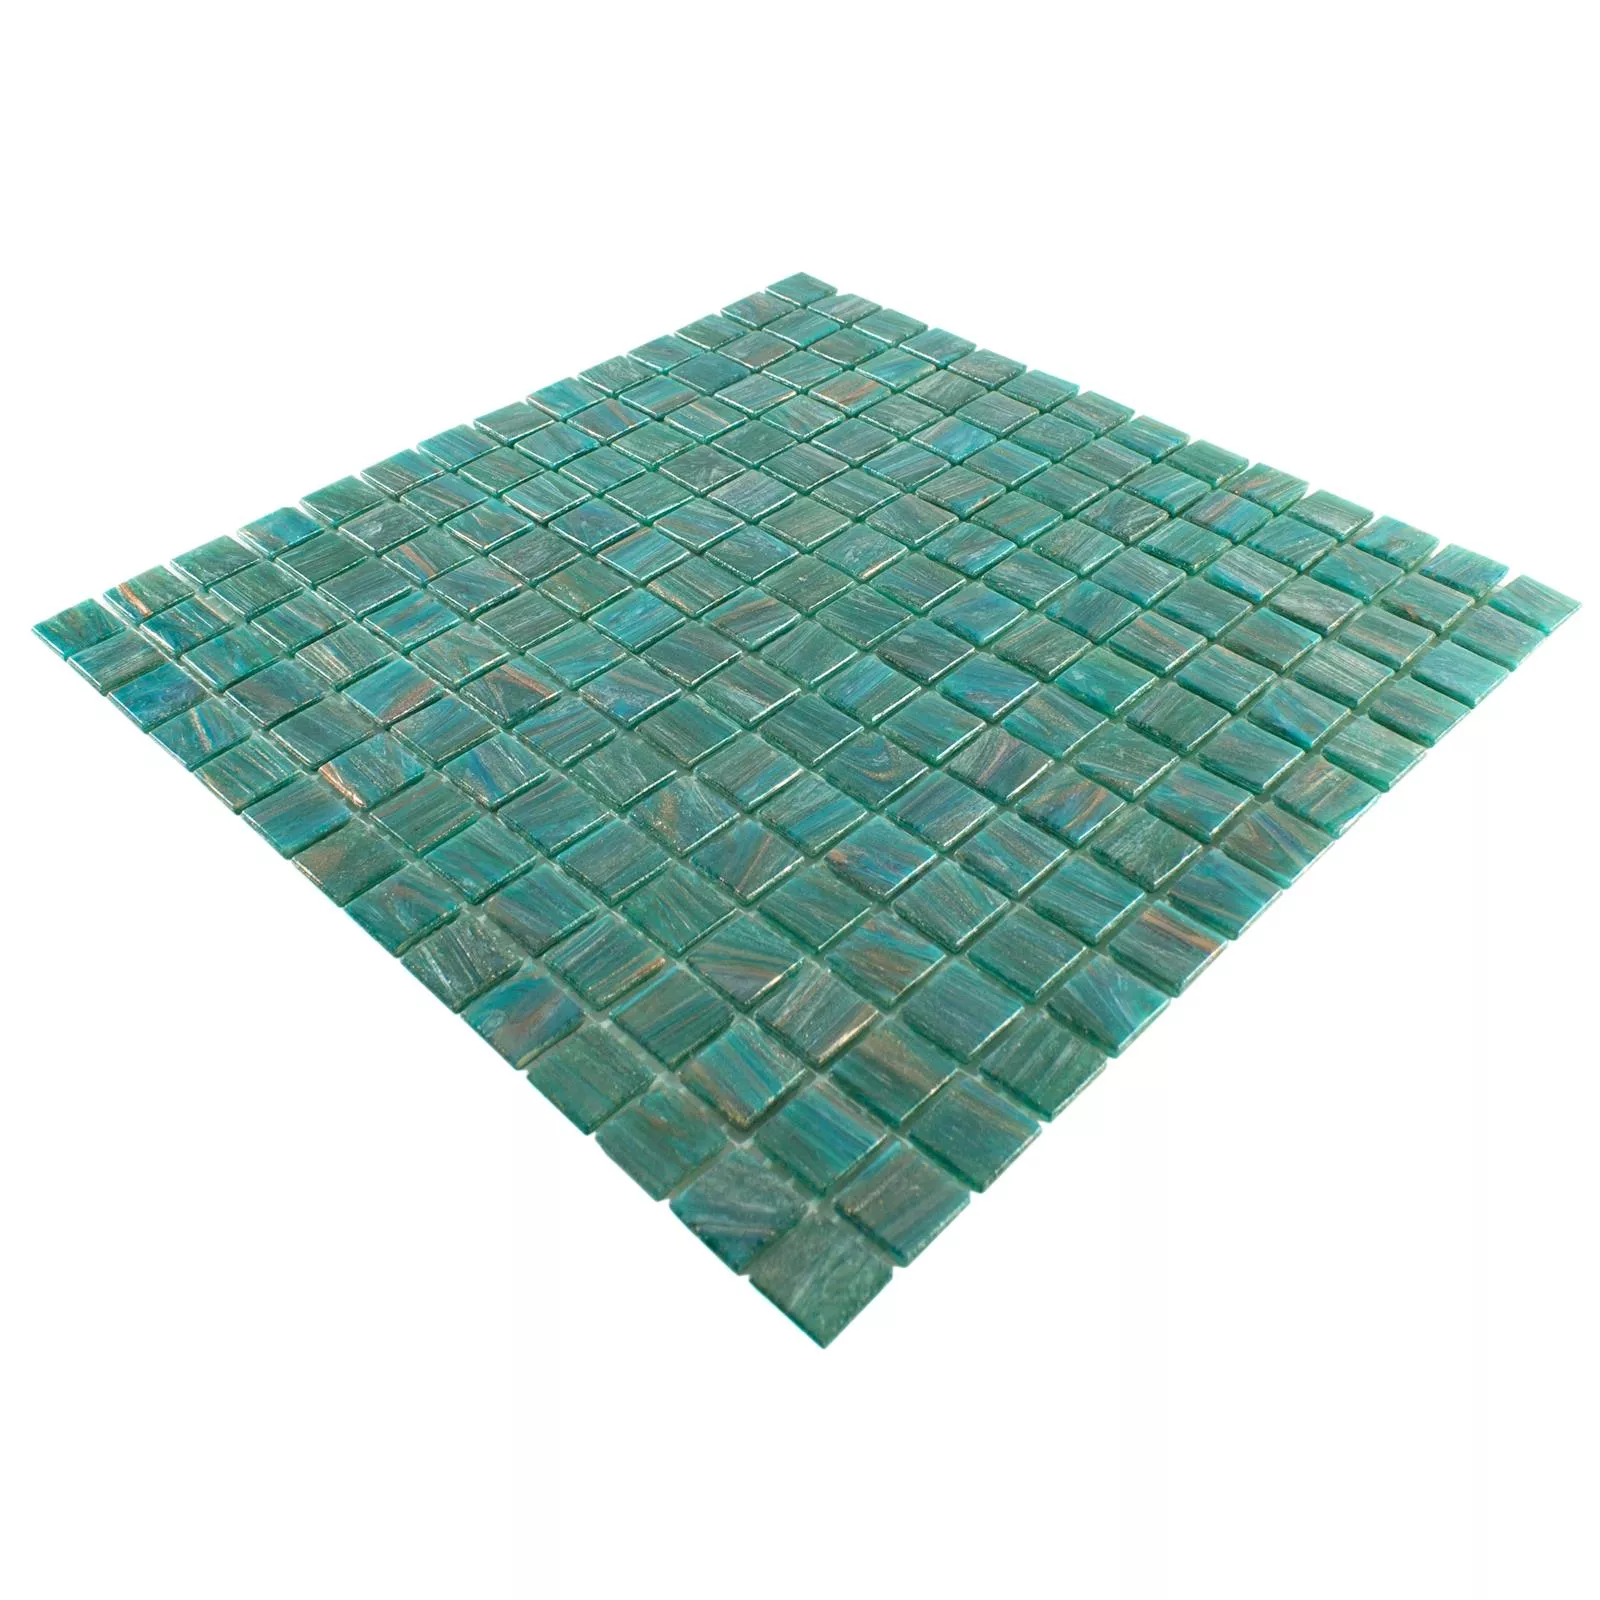 Sample Glass Mosaic Tile Ogeday Gold Effect Green